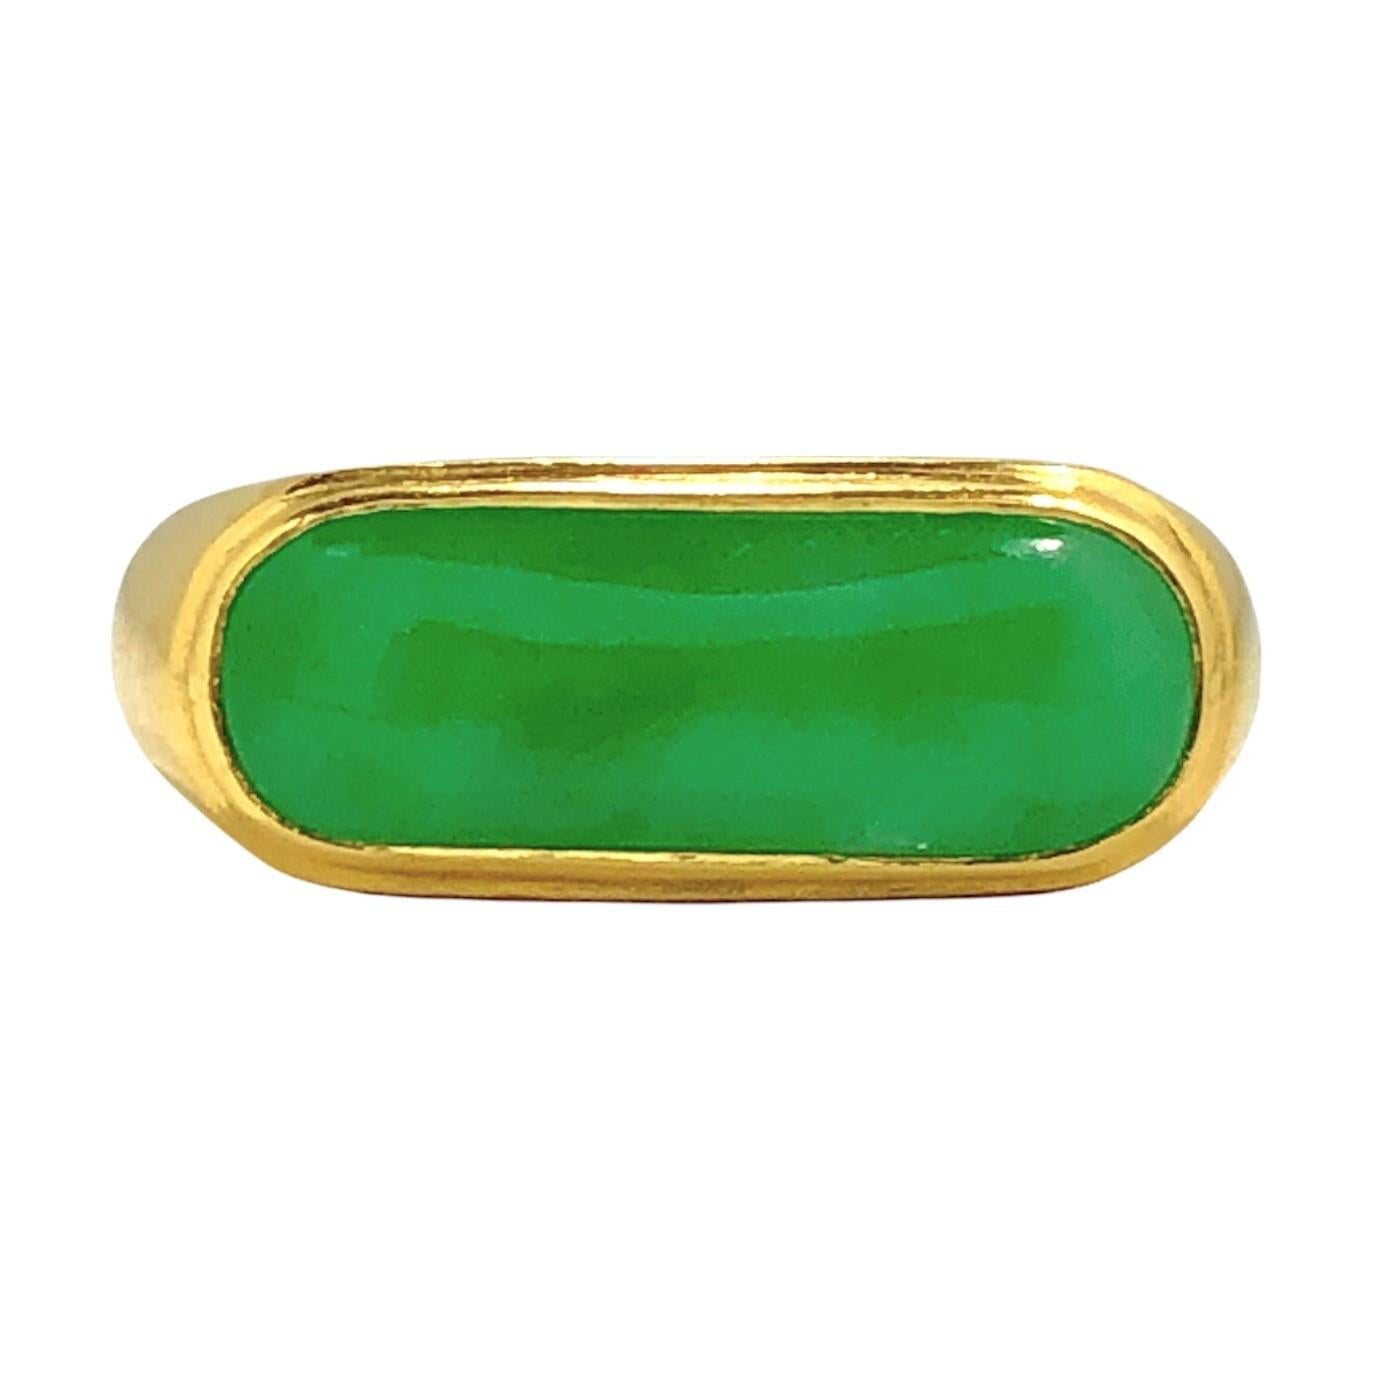 This wonderful vintage saddle ring is crafted from pure gold and hence, has a rich tone and luster not shared by many objects. At the center of it's design area is a vivid green Jadeite Jade cabochon measuring 3/4 inches by 1/4 inch and with intense